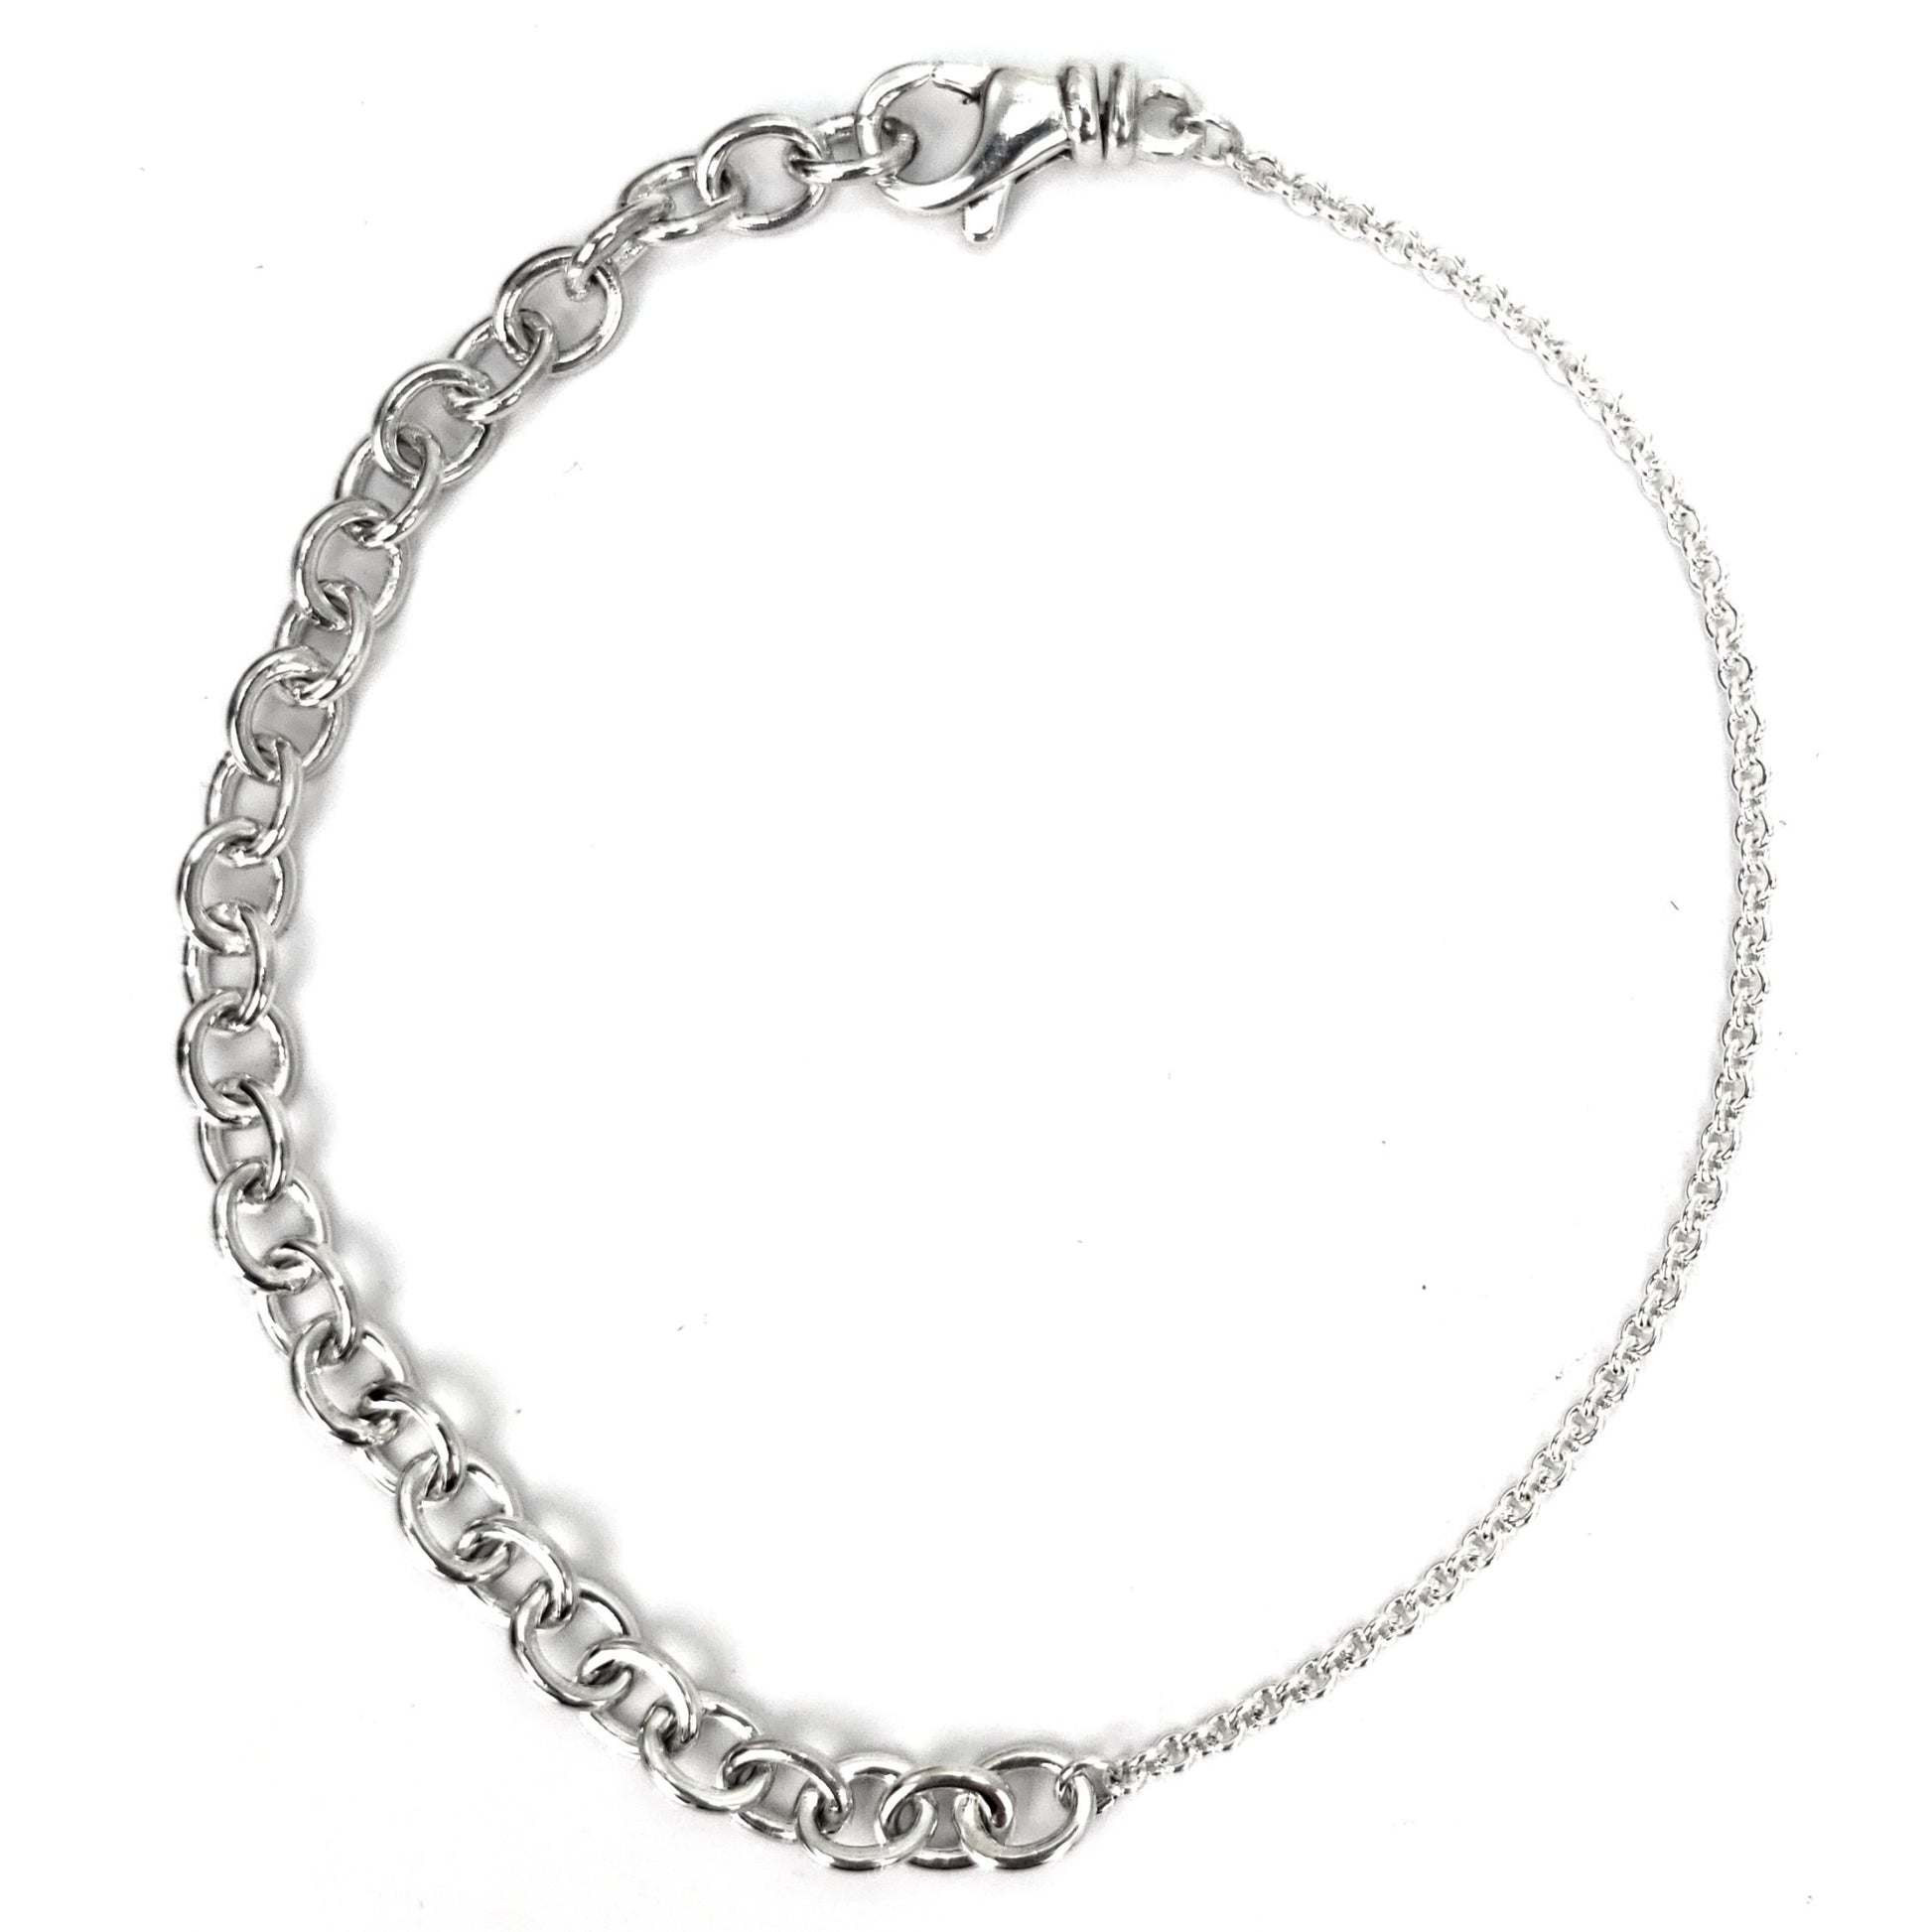 Silver bracelet made of two different chain styles in line.